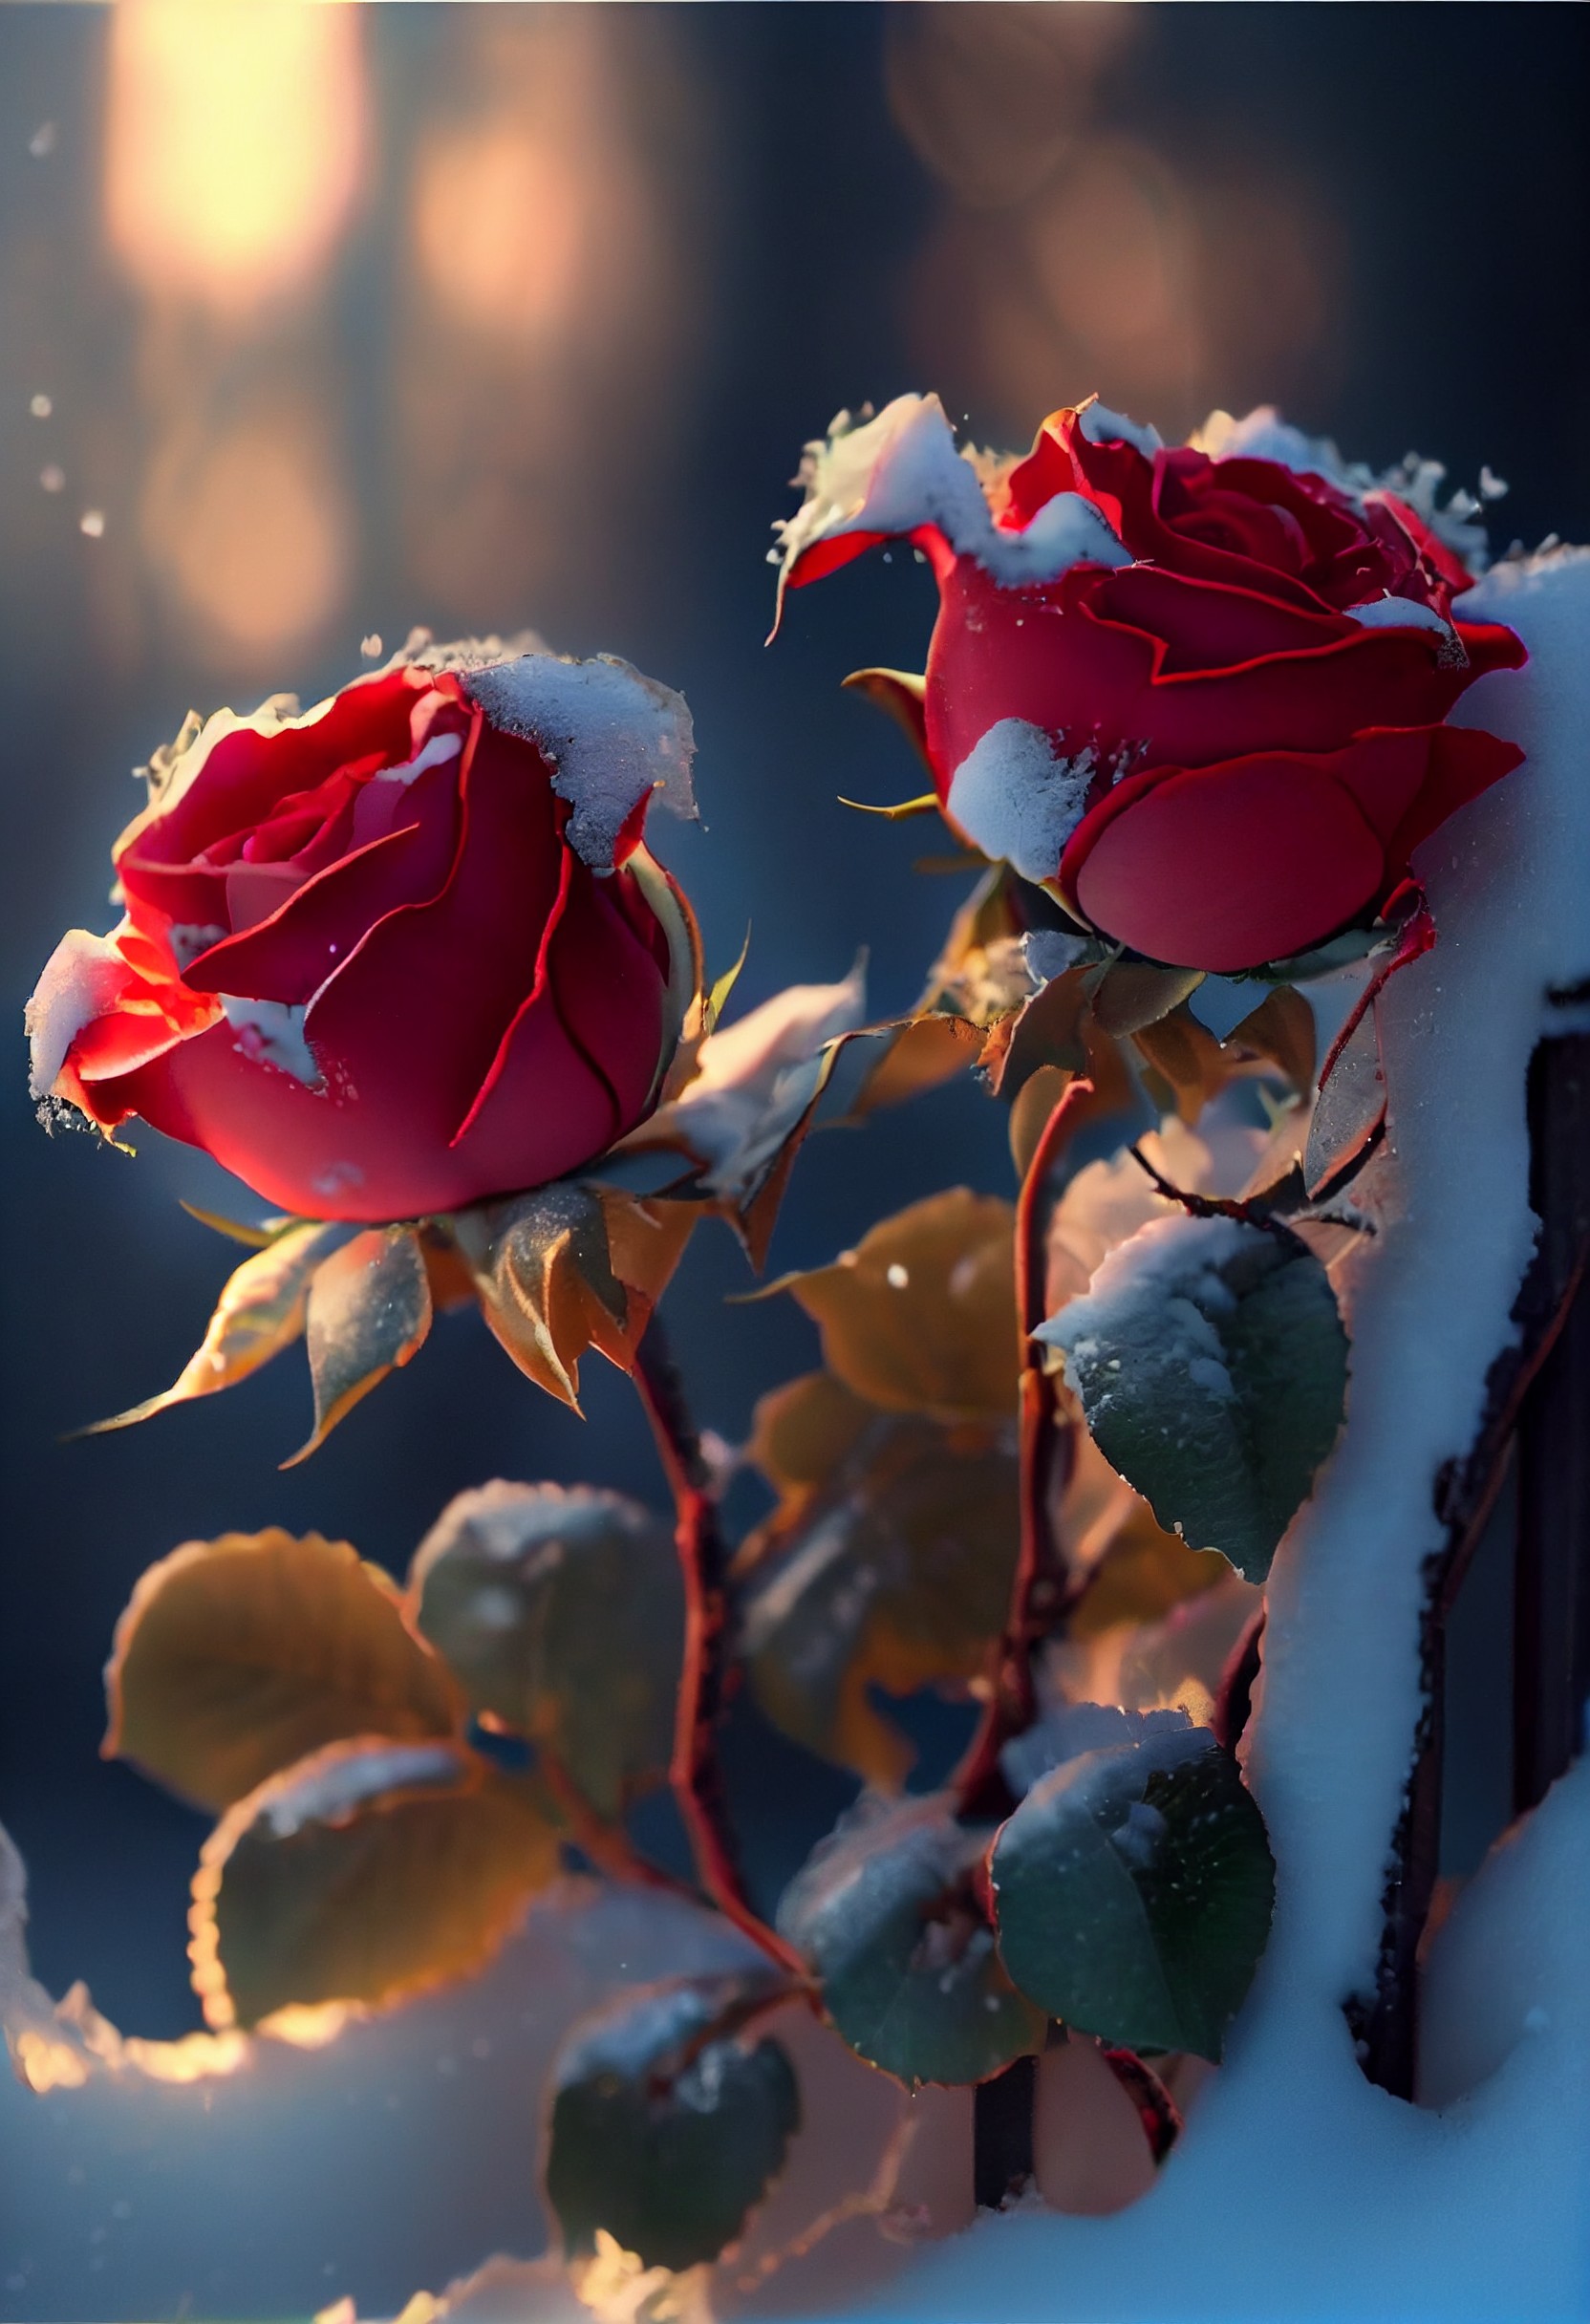 4 images of red rose in snow by Midjourney